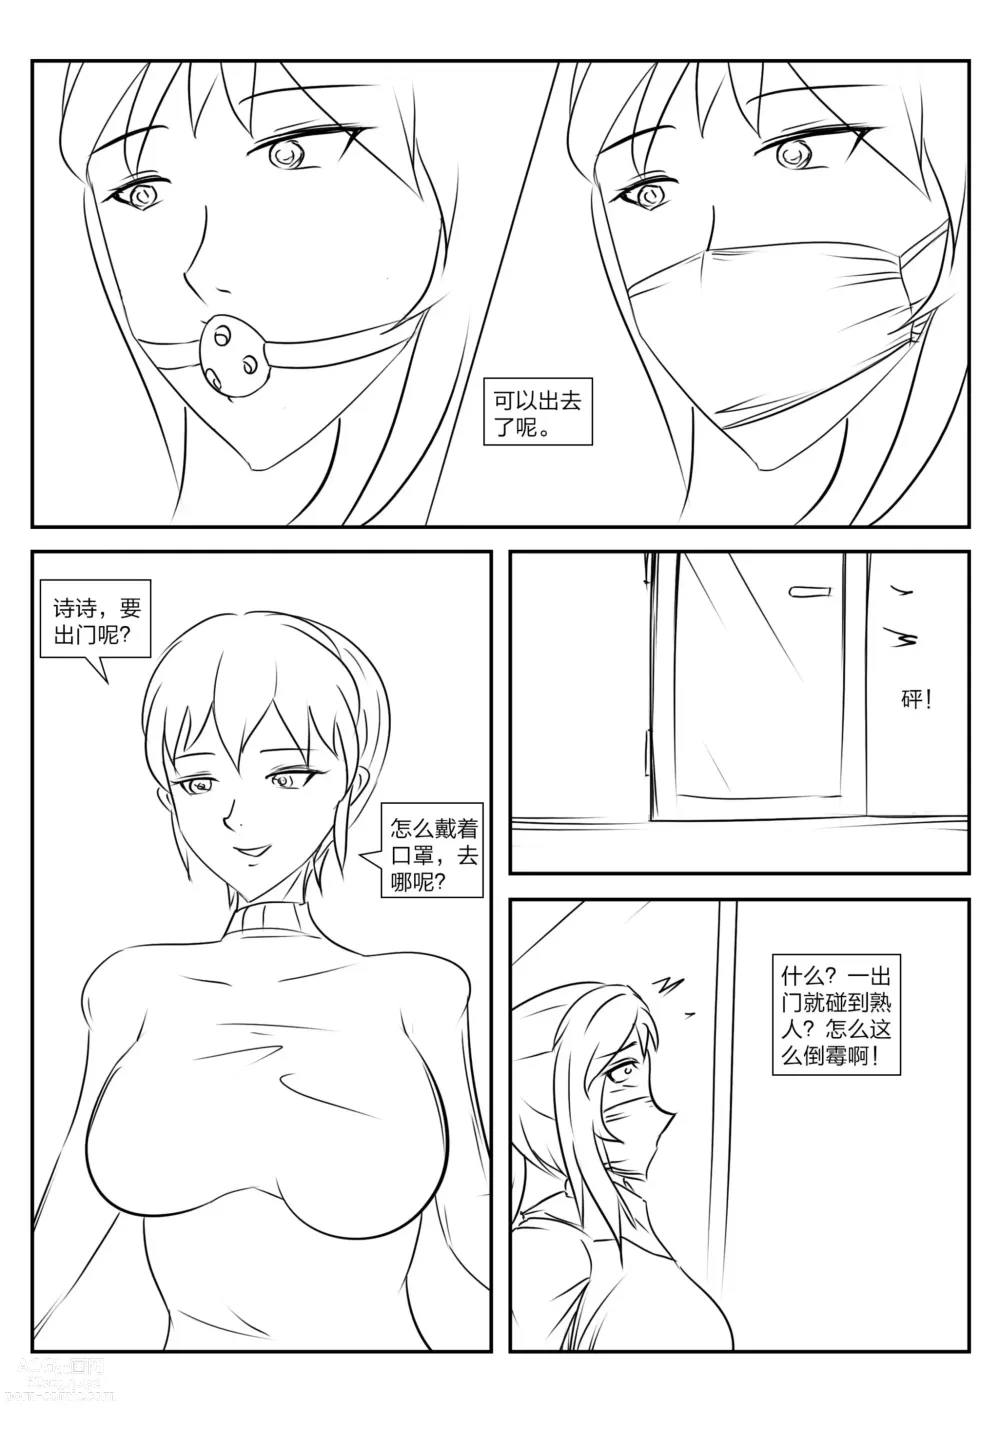 Page 38 of doujinshi The crisis in public self bondage